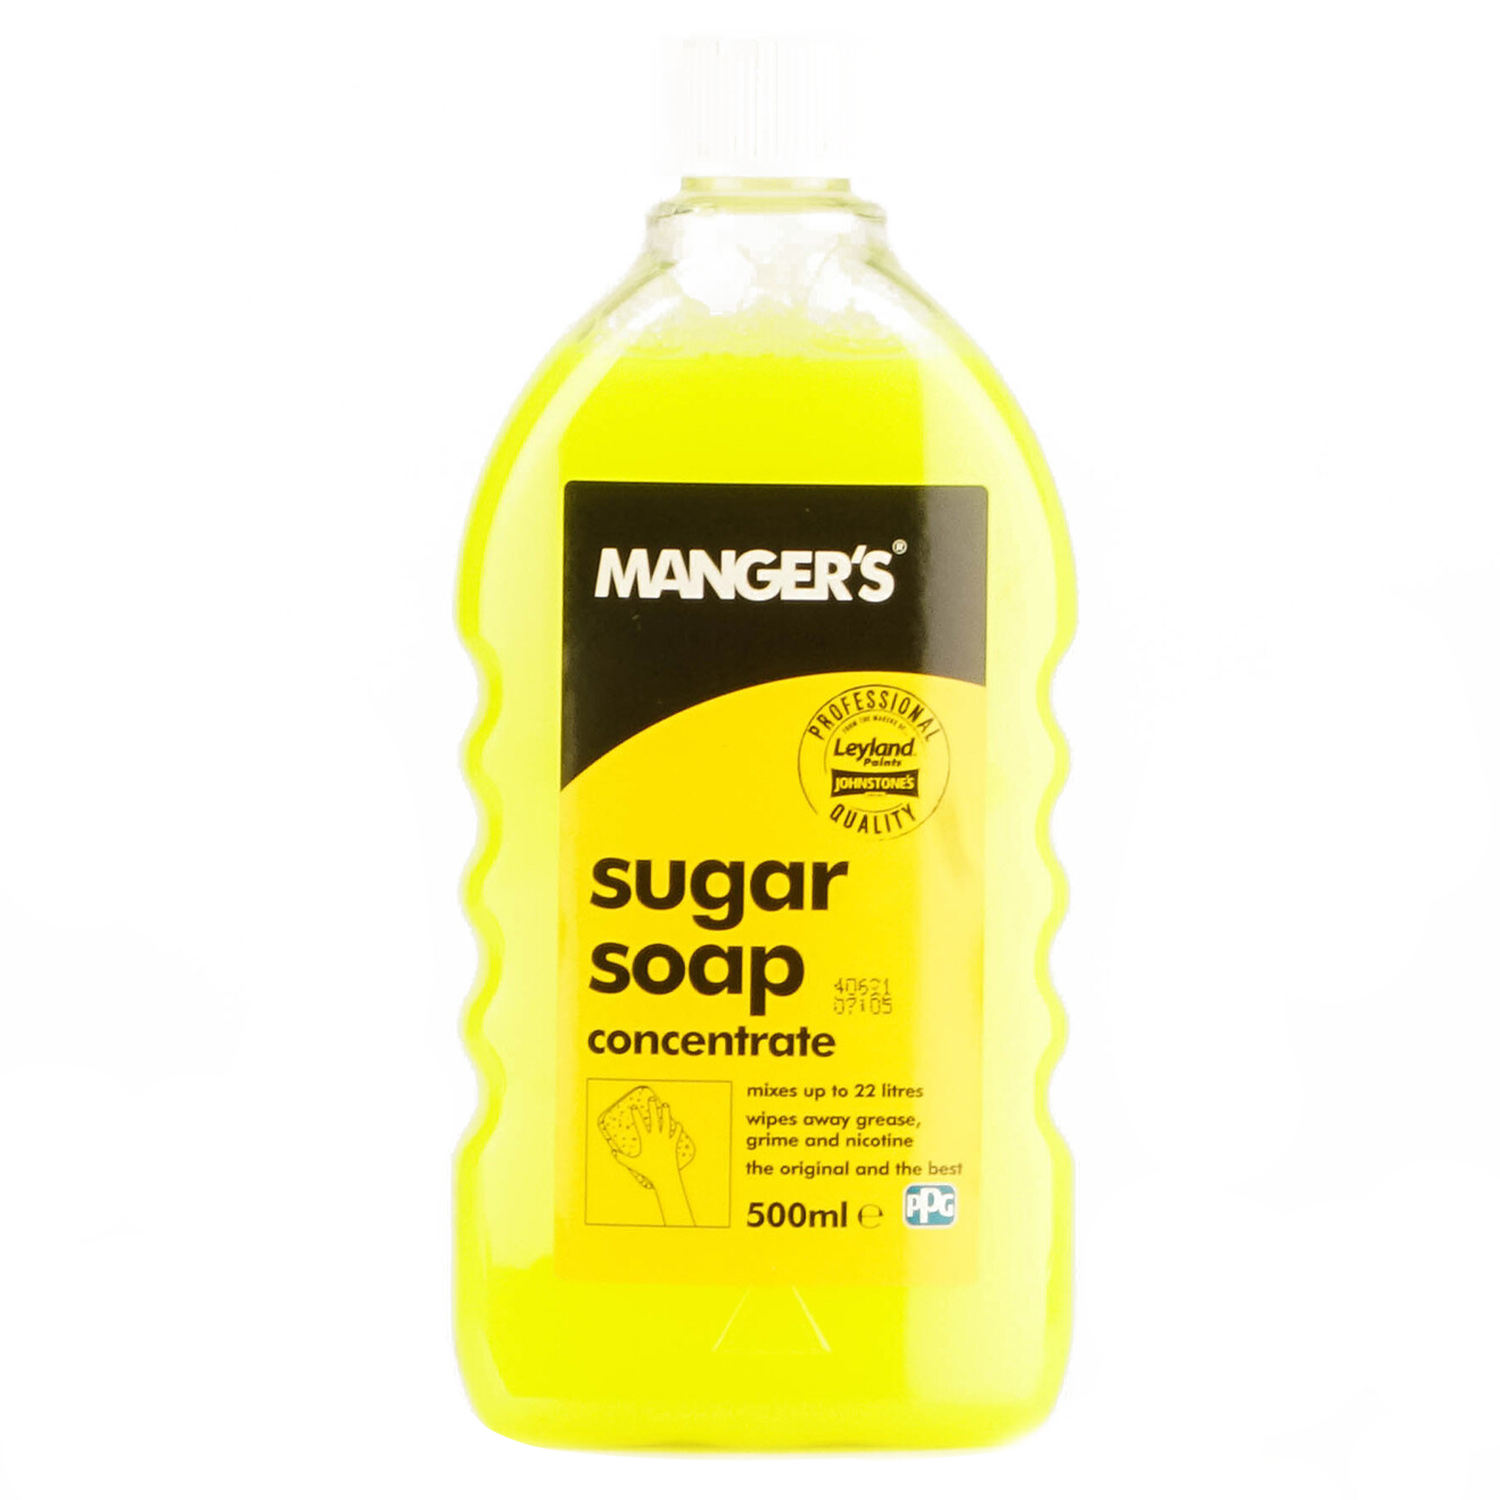 Manger's Sugar Soap Concentrate 500ml Image